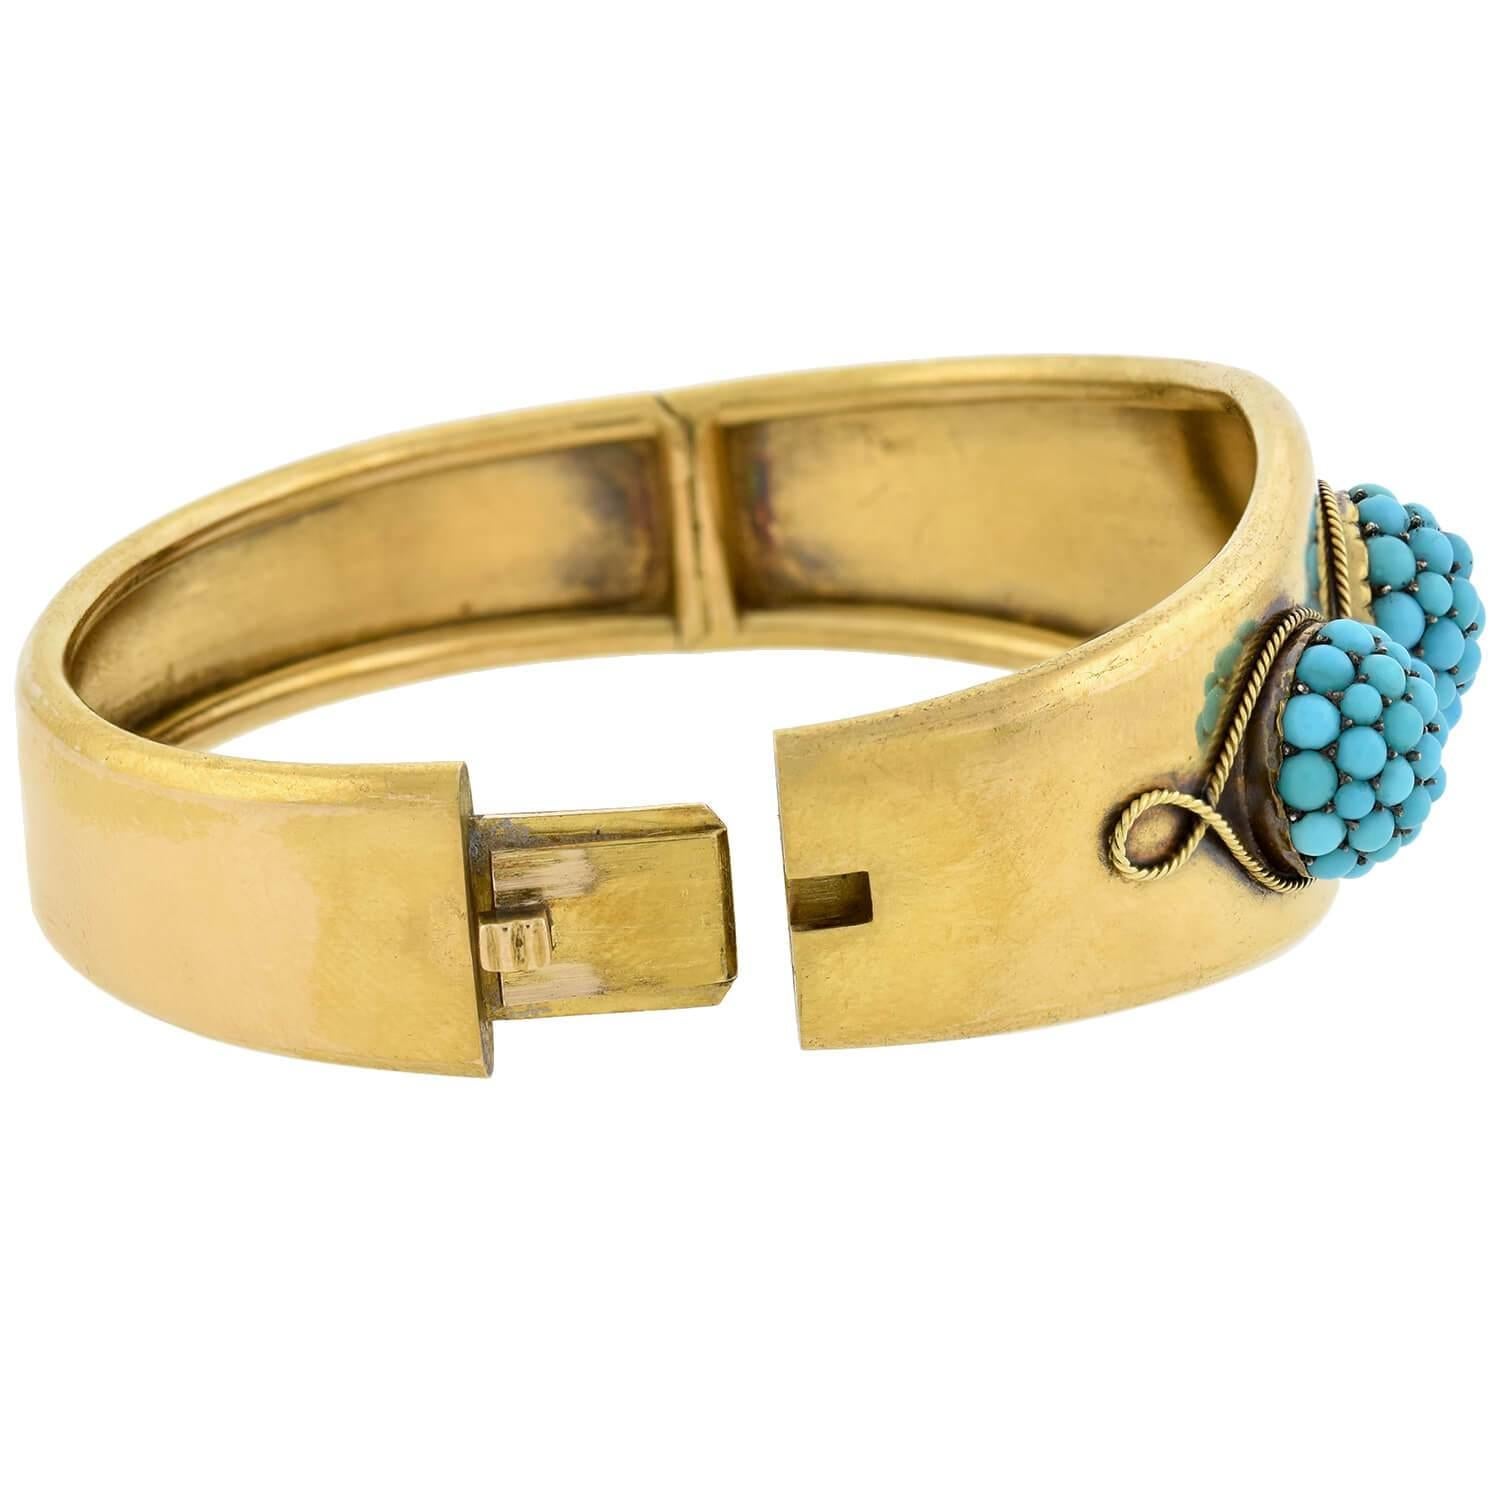 A striking turquoise bracelet from the Victorian (ca1880s) era! Crafted in rich 18kt yellow gold, this stunning piece features a belly-front style adorned with three domed shapes encrusted with pavé turquoise. A twisted gold rope carries across the